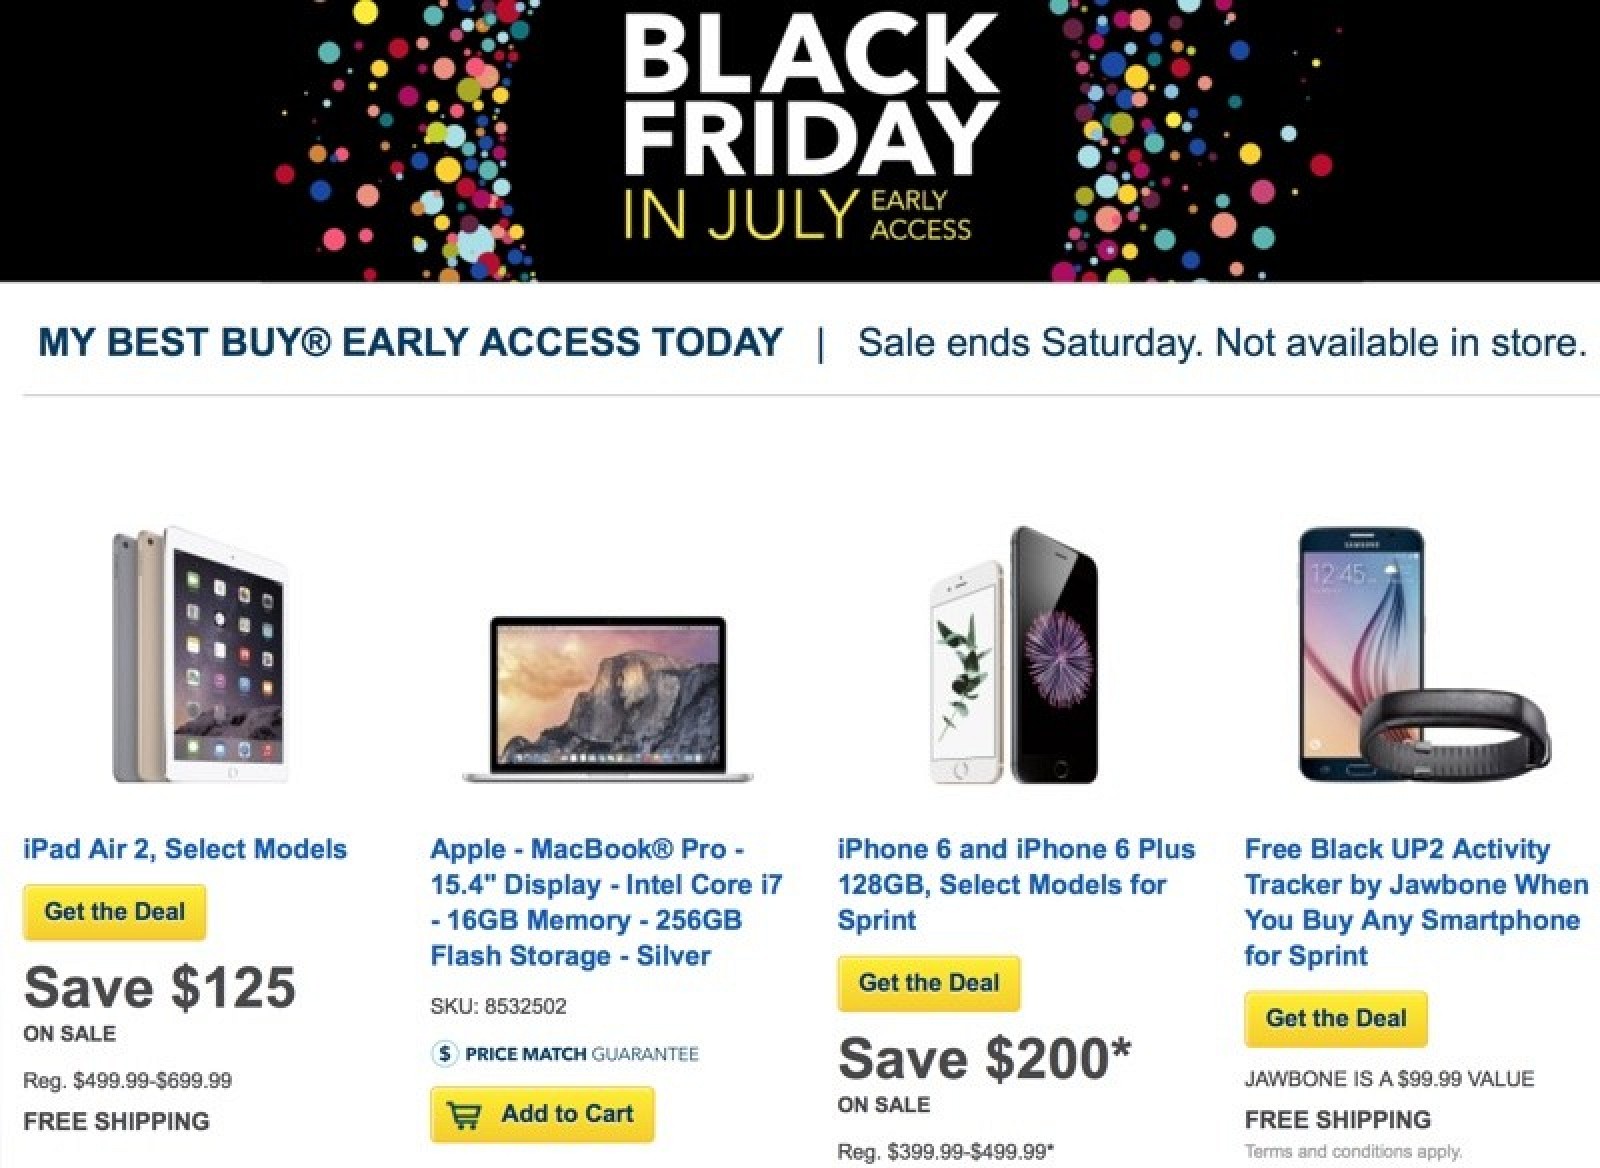 Best Buy Launches Black Friday in July Sale, Discounts iPad Air 2 by